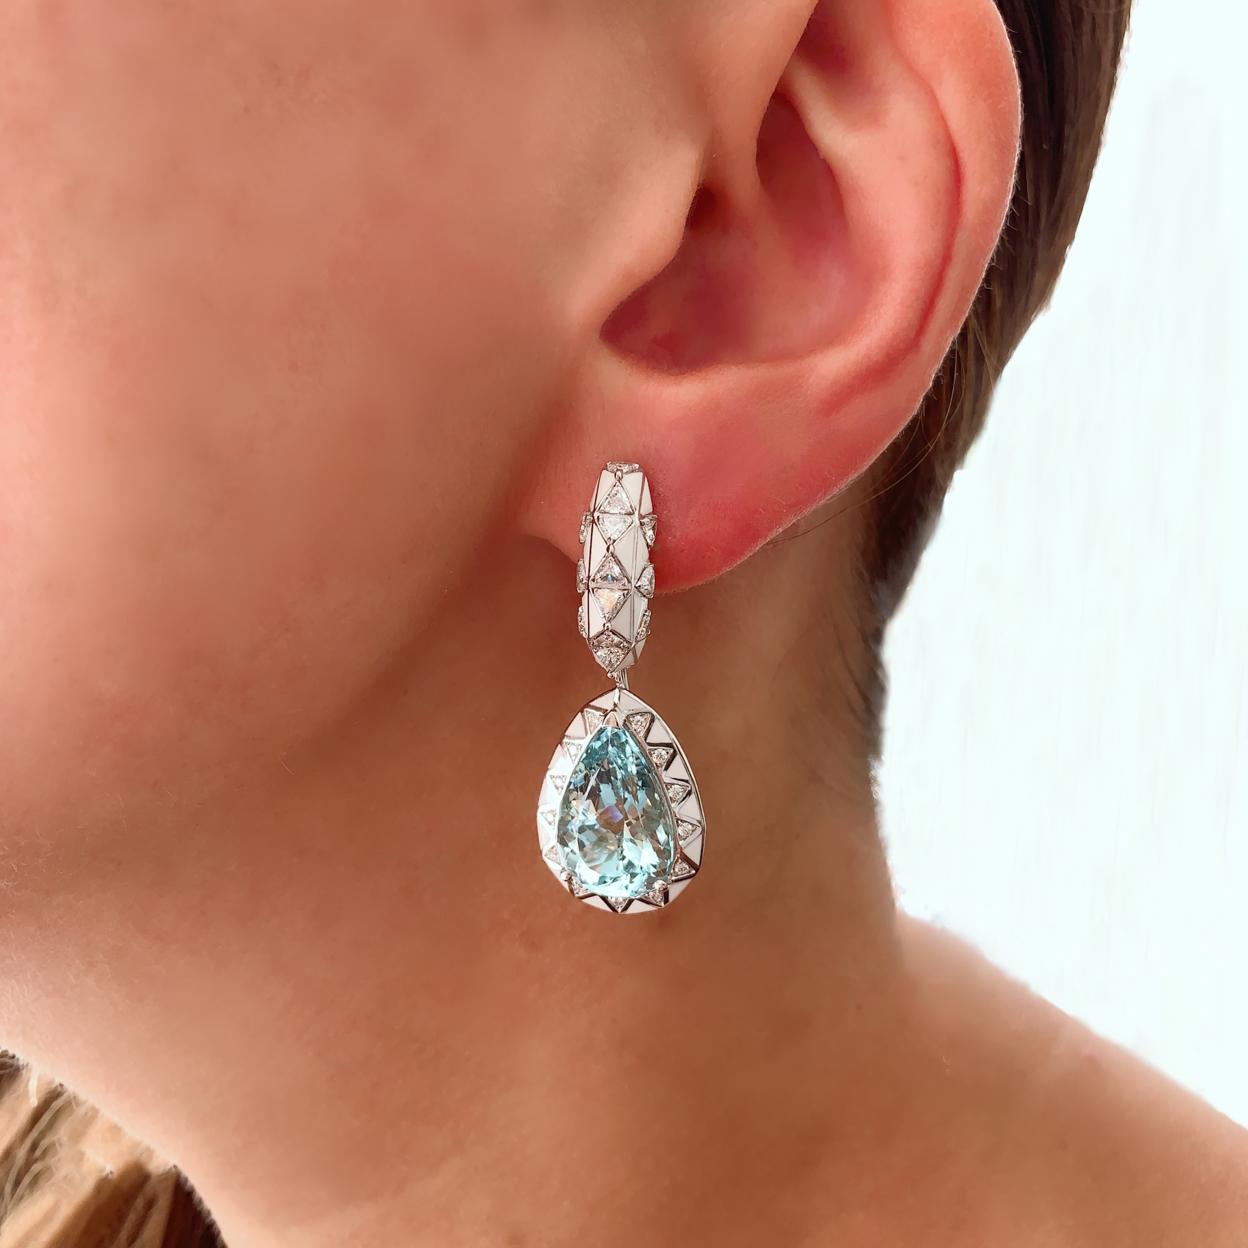 A Pair of Pear-Cut Aquamarines, Diamond and Enamel Gold Earrings in the Candy Collection by Jewelry Designer, Sarah Ho.

Aquamarine pear cut drops with total 15.28ct surrounded by white enamel and round white diamonds F VS 0.25ct as a detachable